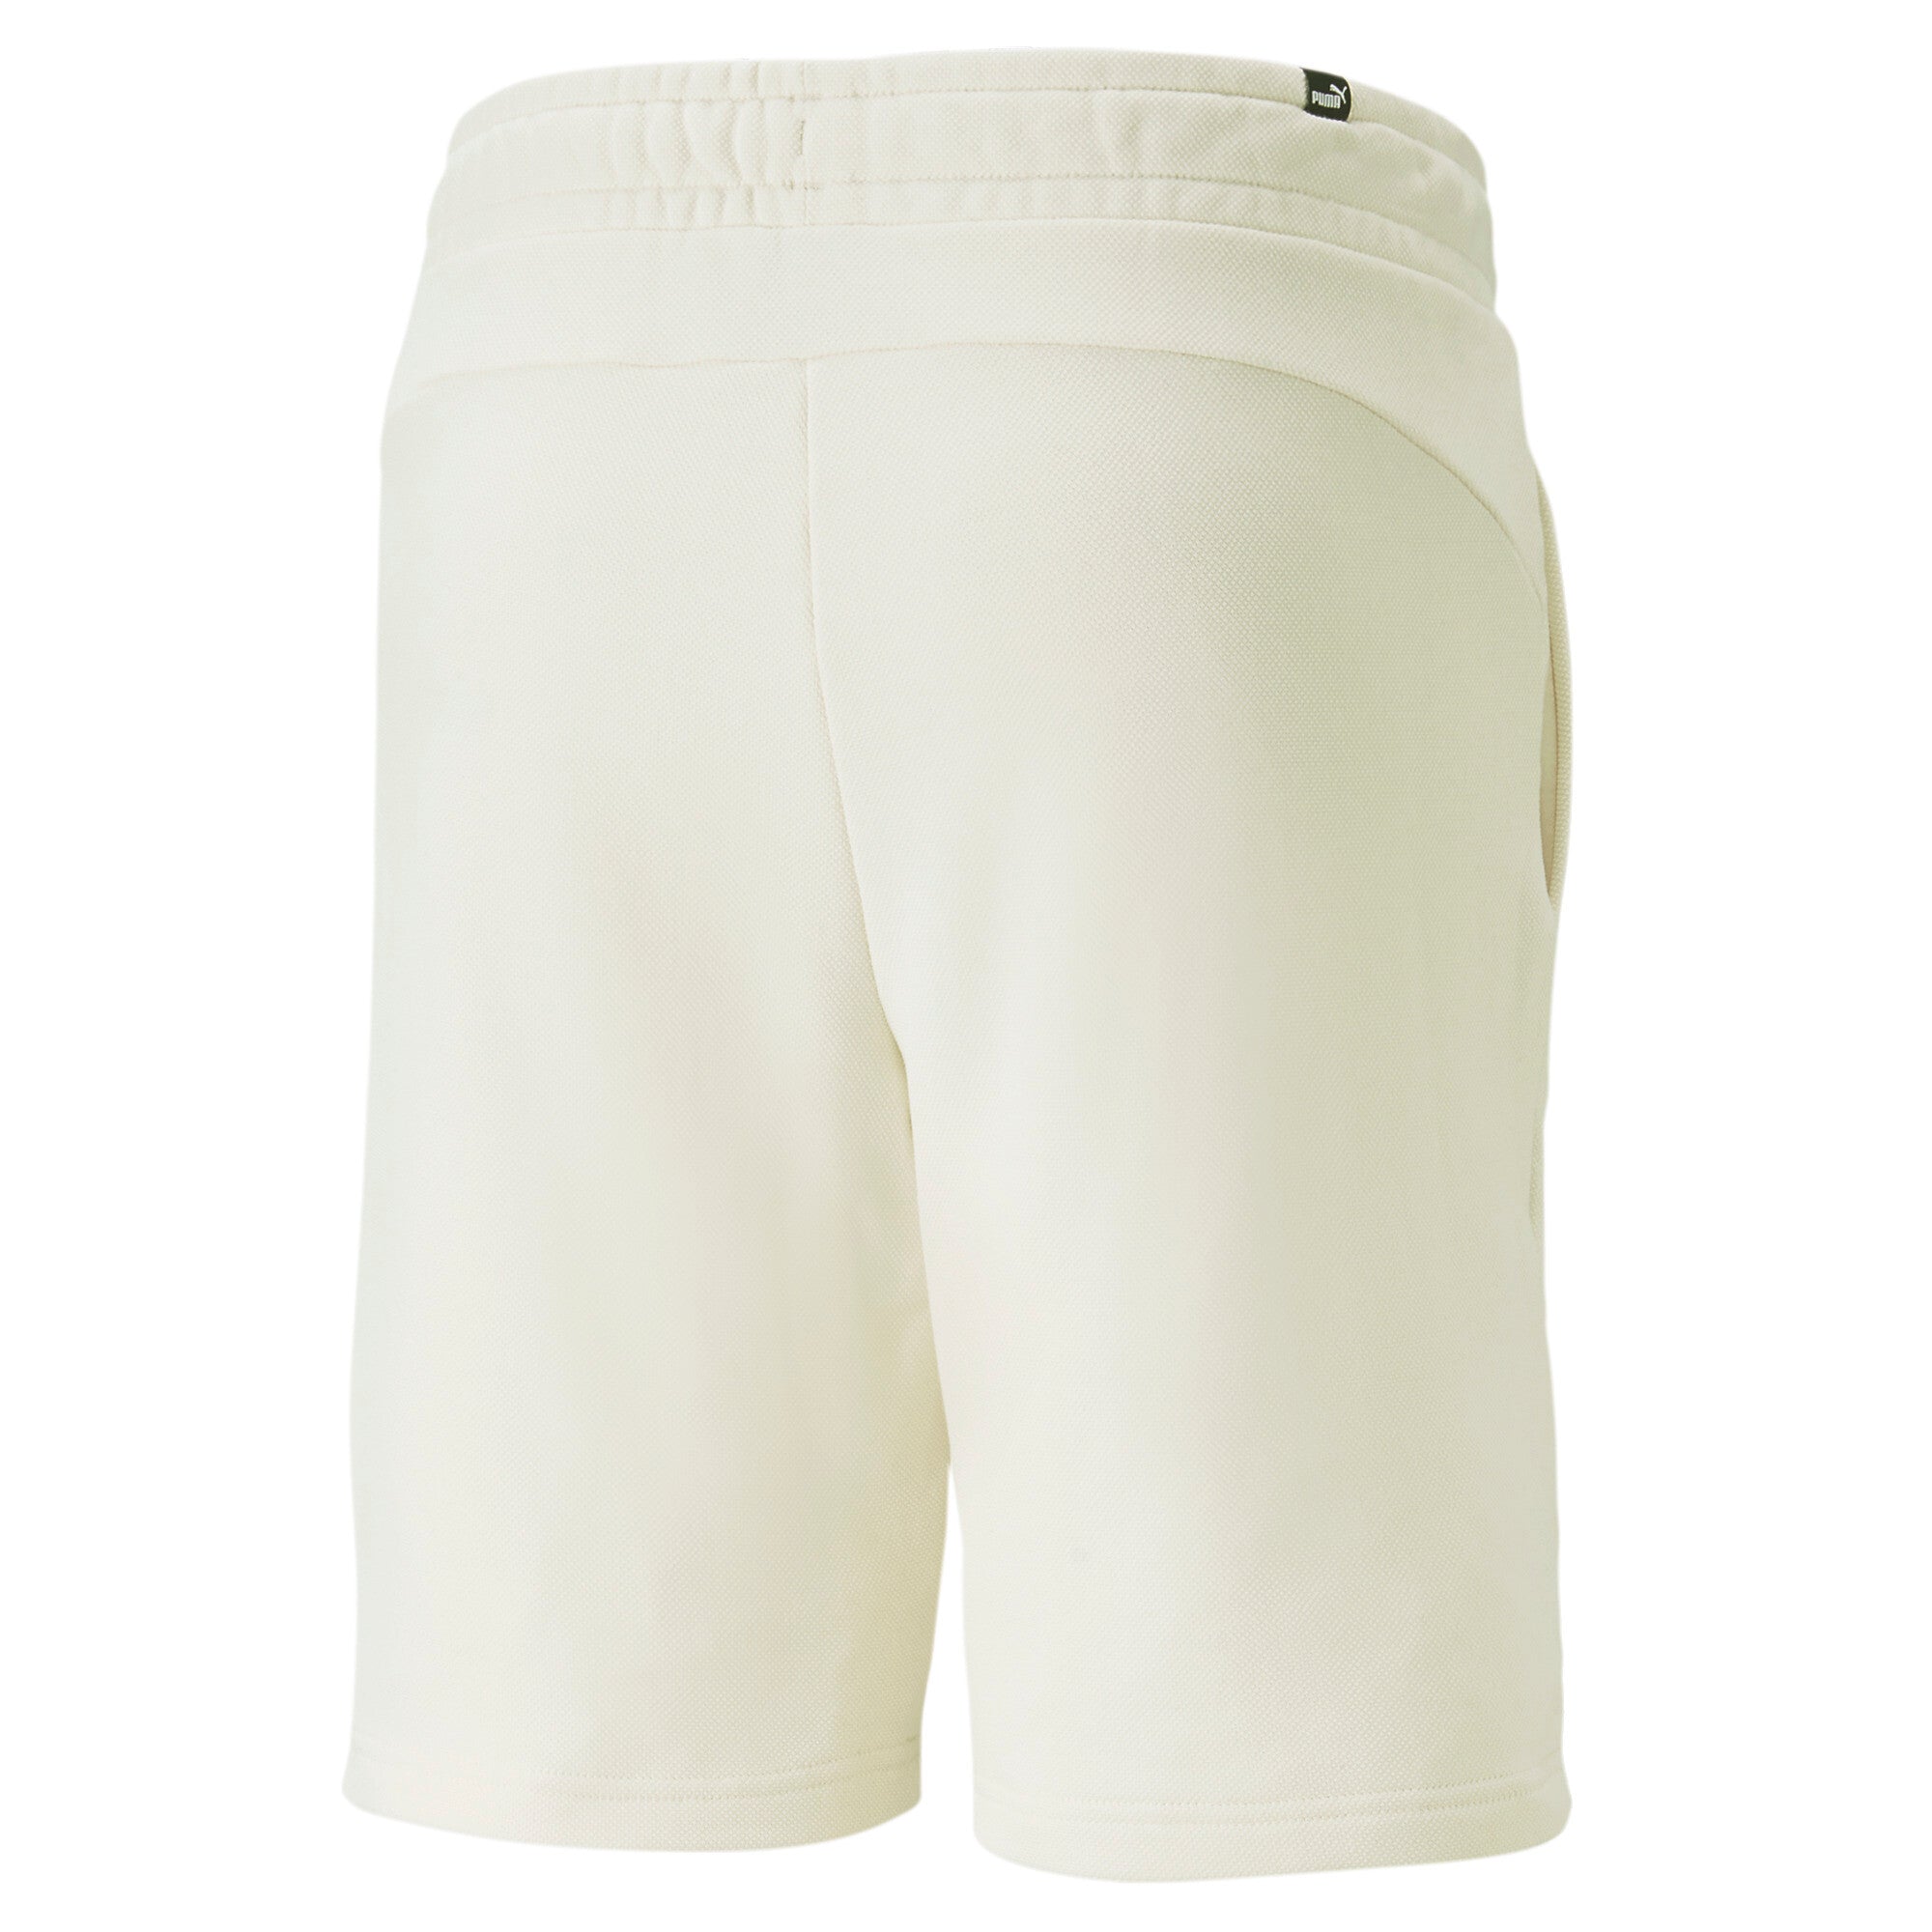 MENS ESS ELEVATED SHORTS - 67339065